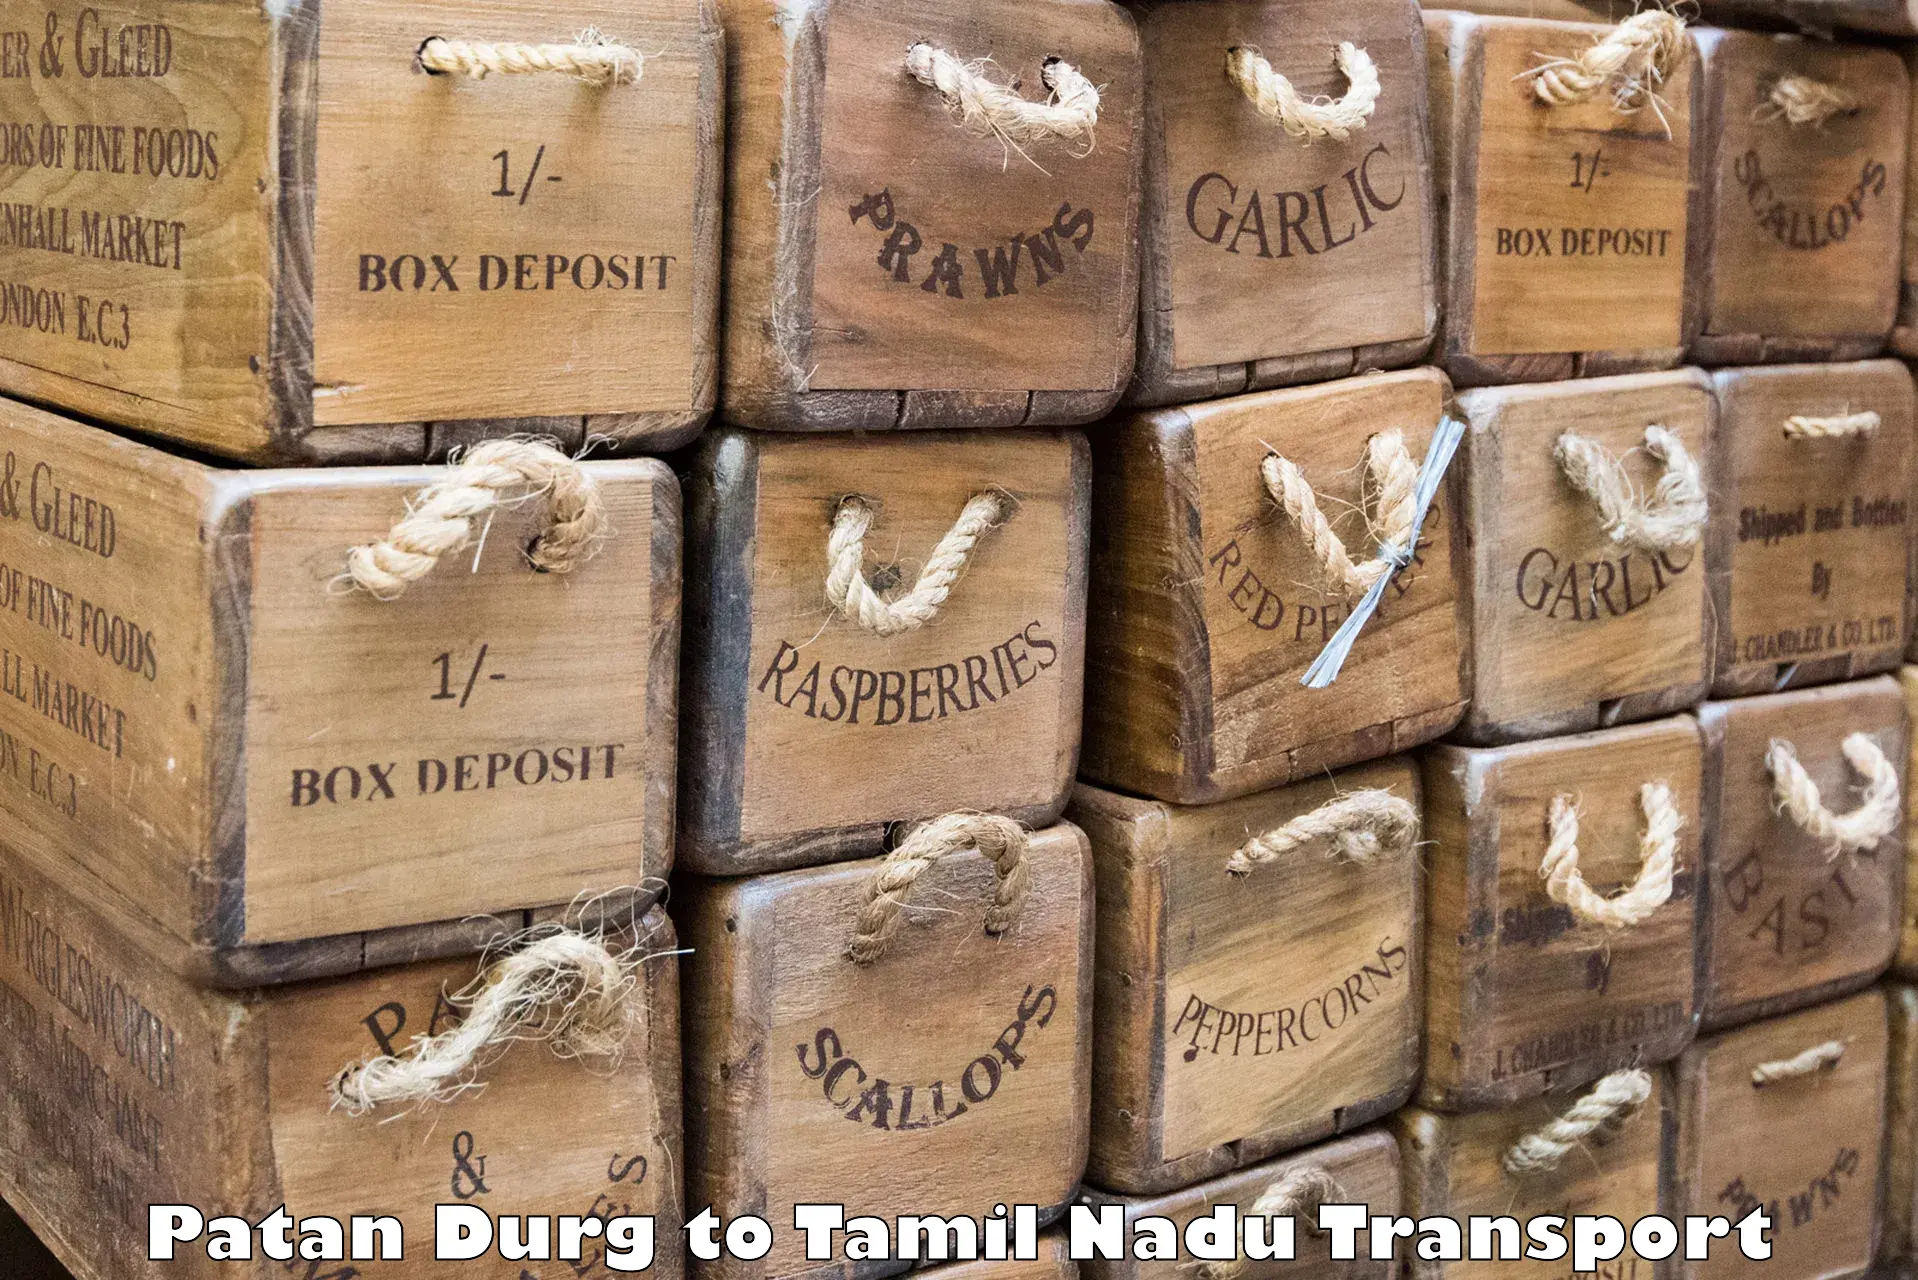 Daily parcel service transport Patan Durg to Pennadam